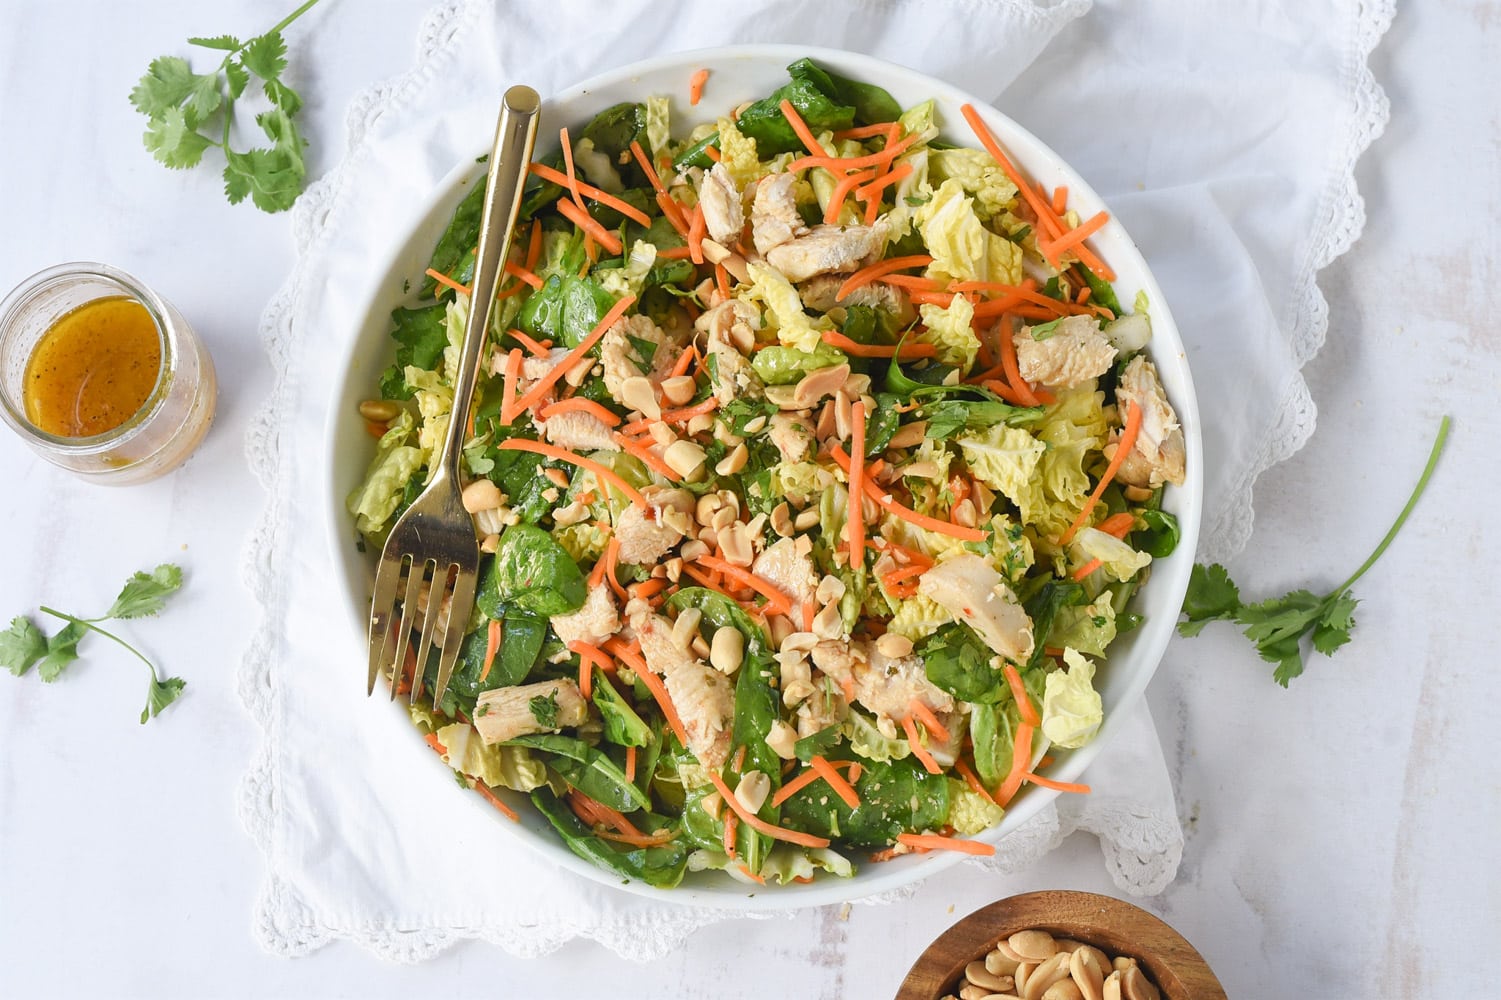 Crunchy Salad with Asian Dressing